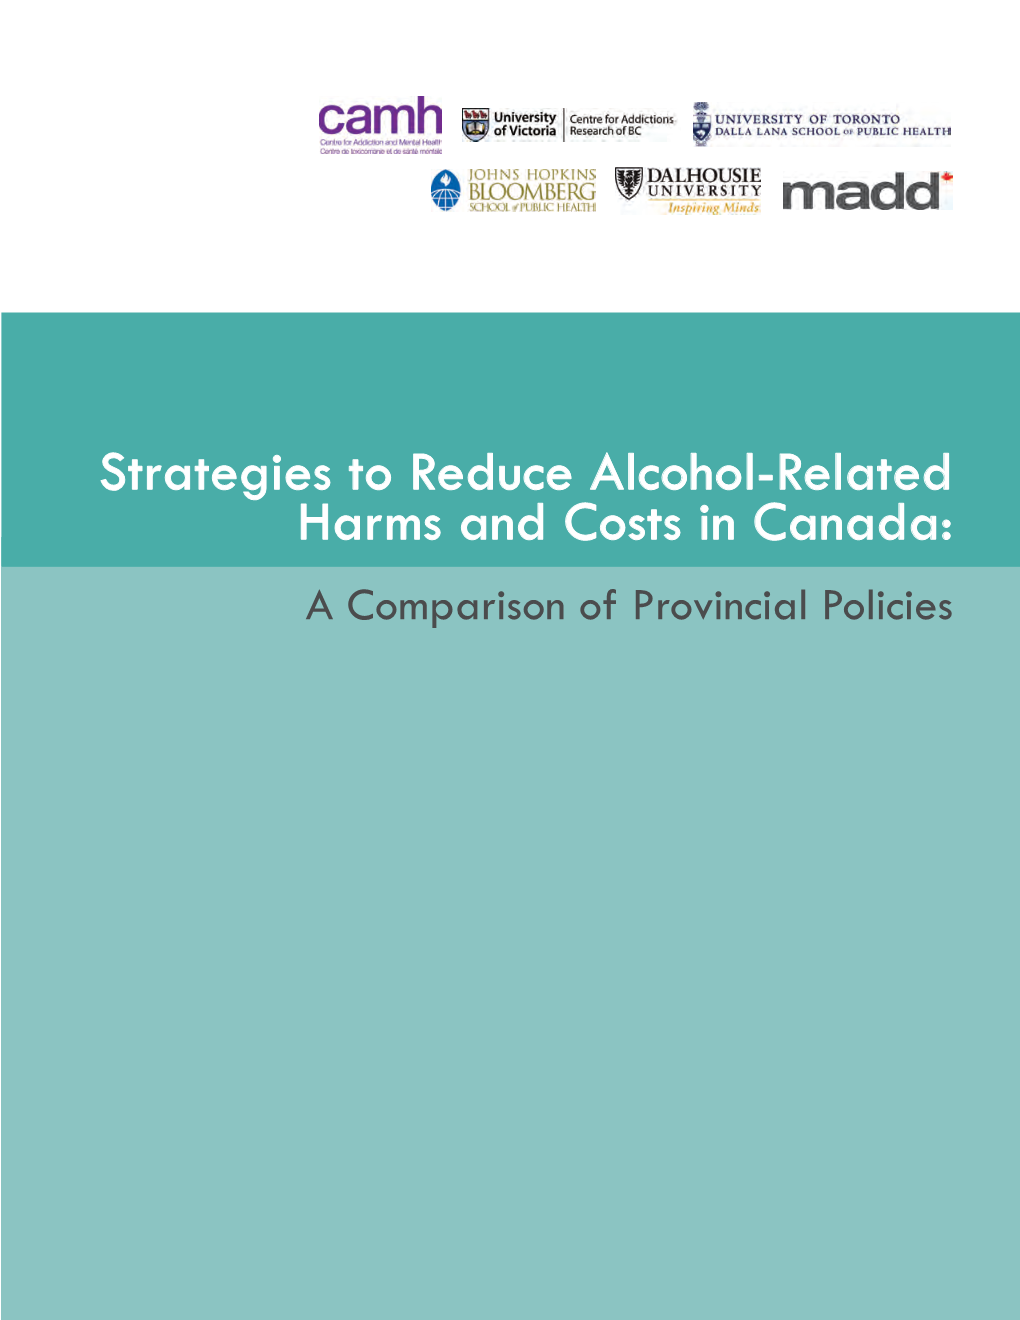 Strategies to Reduce Alcohol-Related Harms and Costs in Canada: a Comparison of Provincial Policies